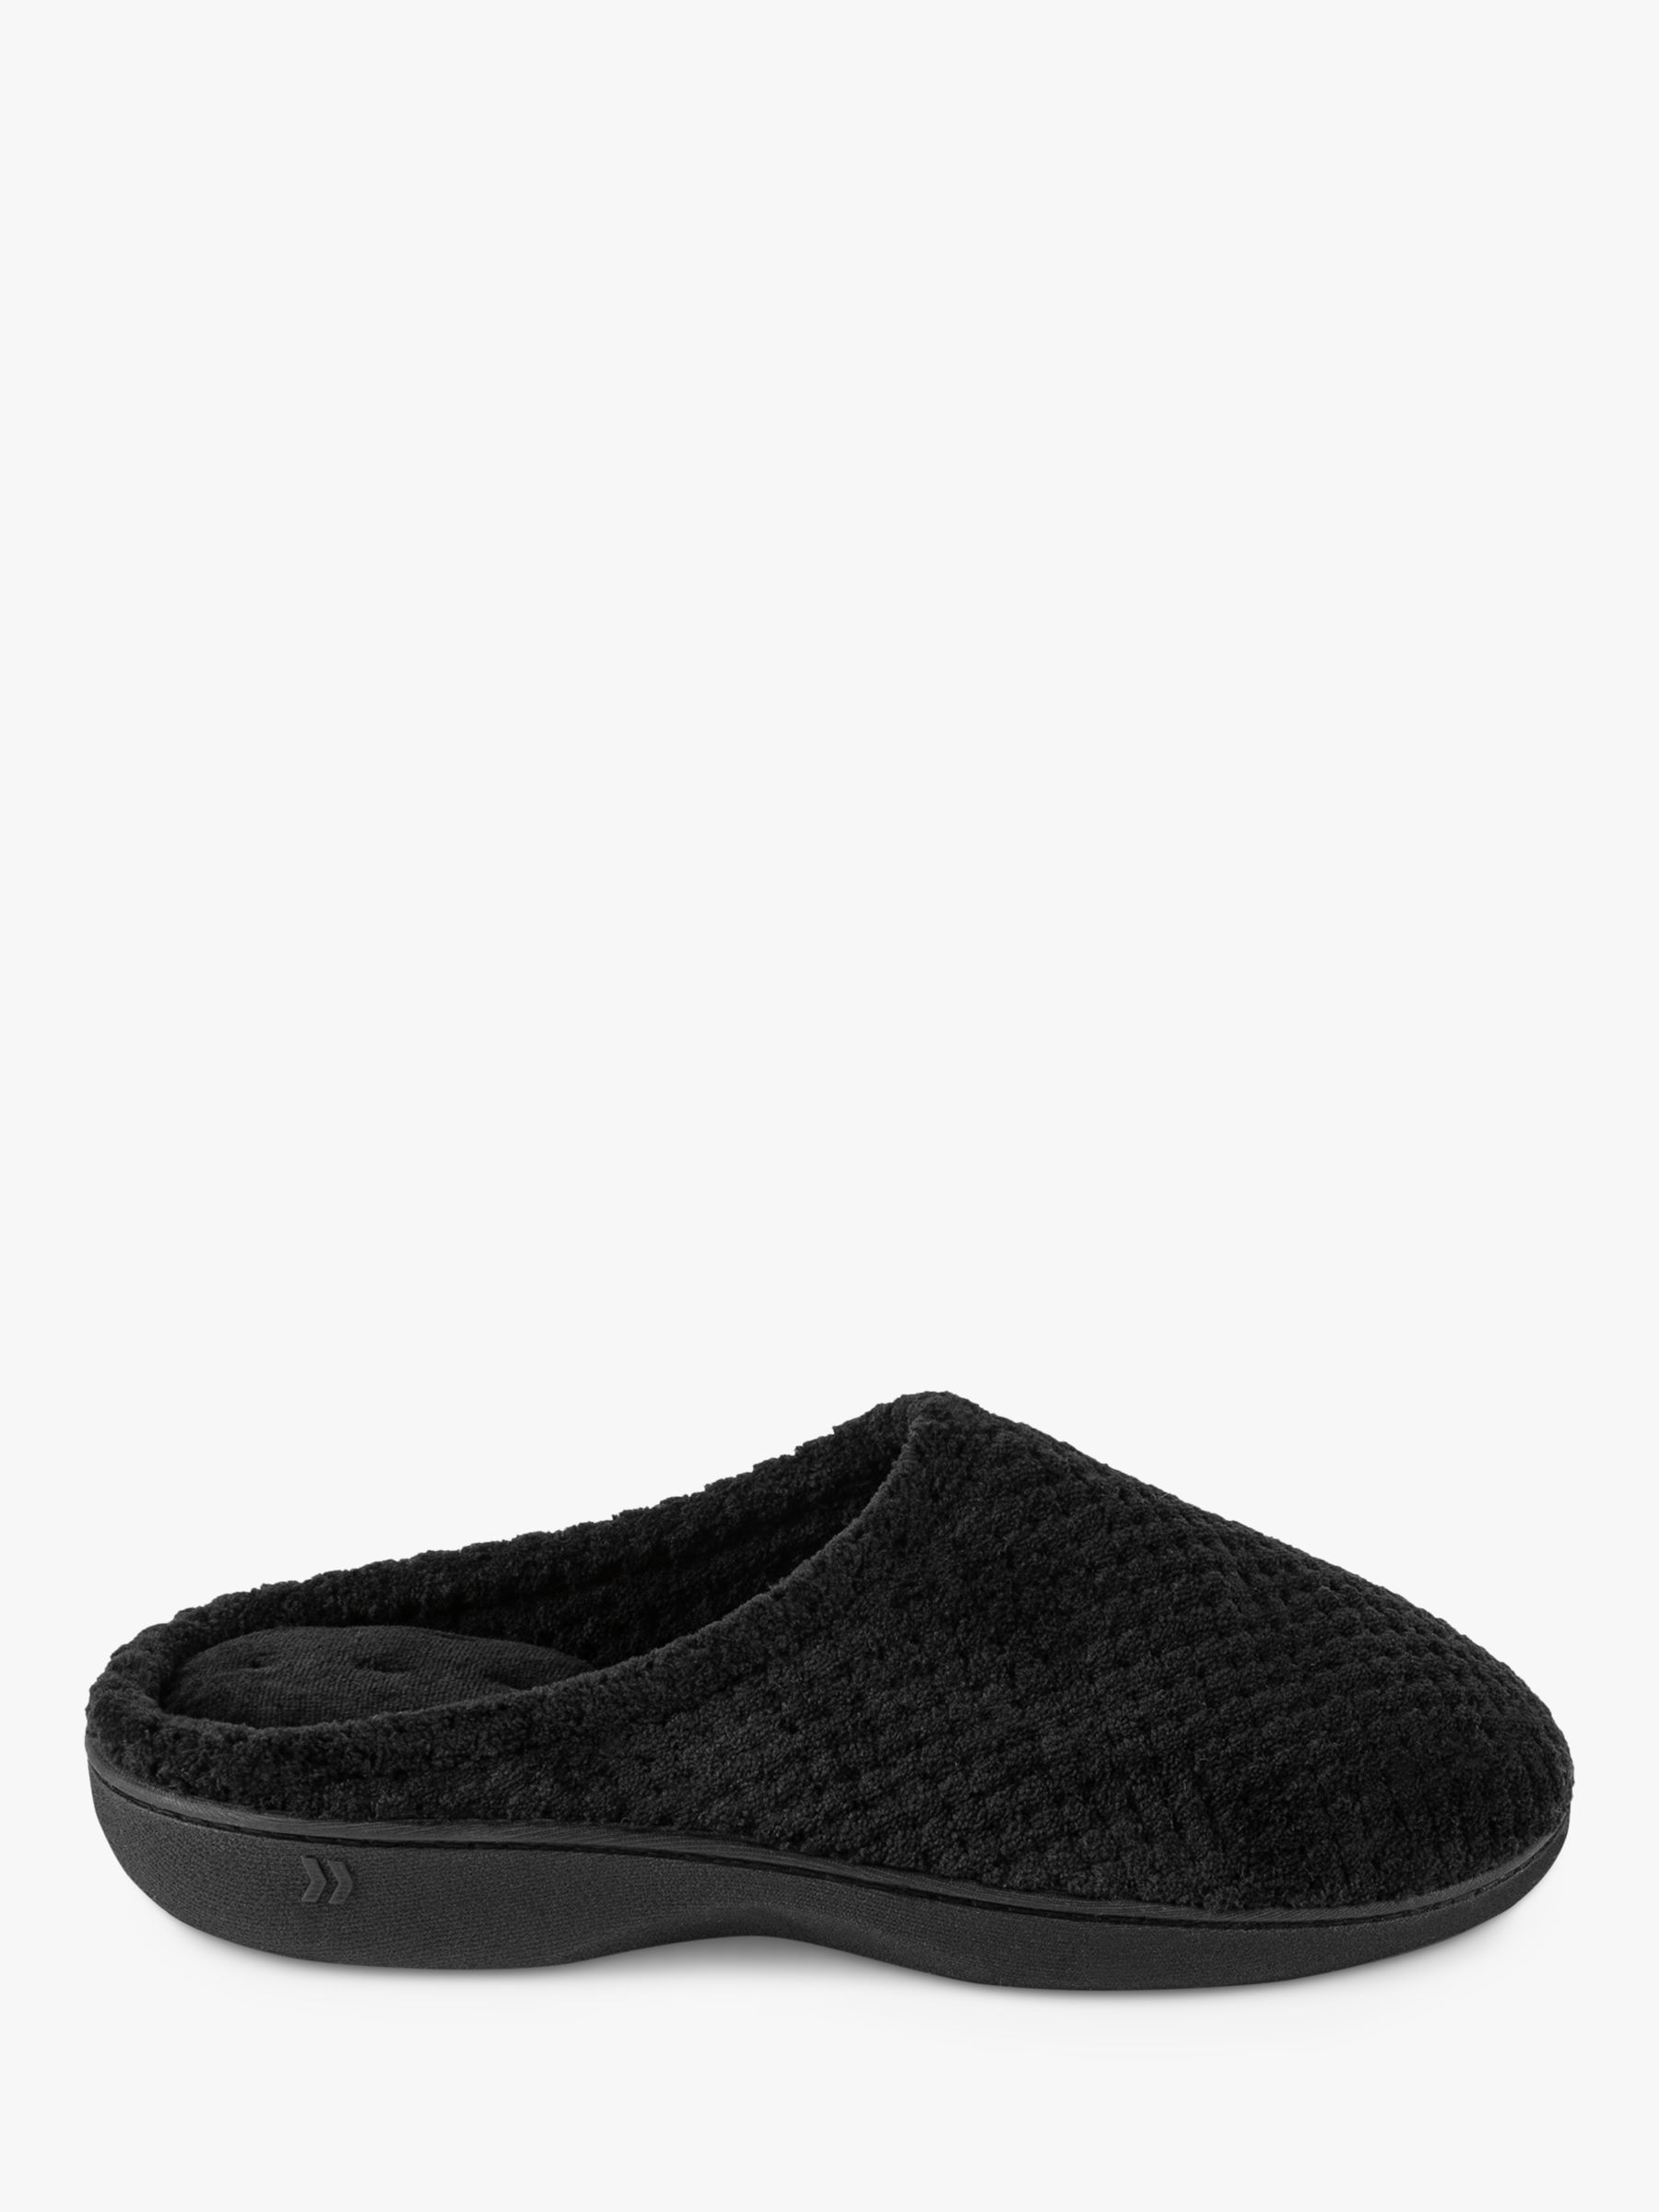 totes Popcorn Terry Mule Slippers, Black at John Lewis & Partners